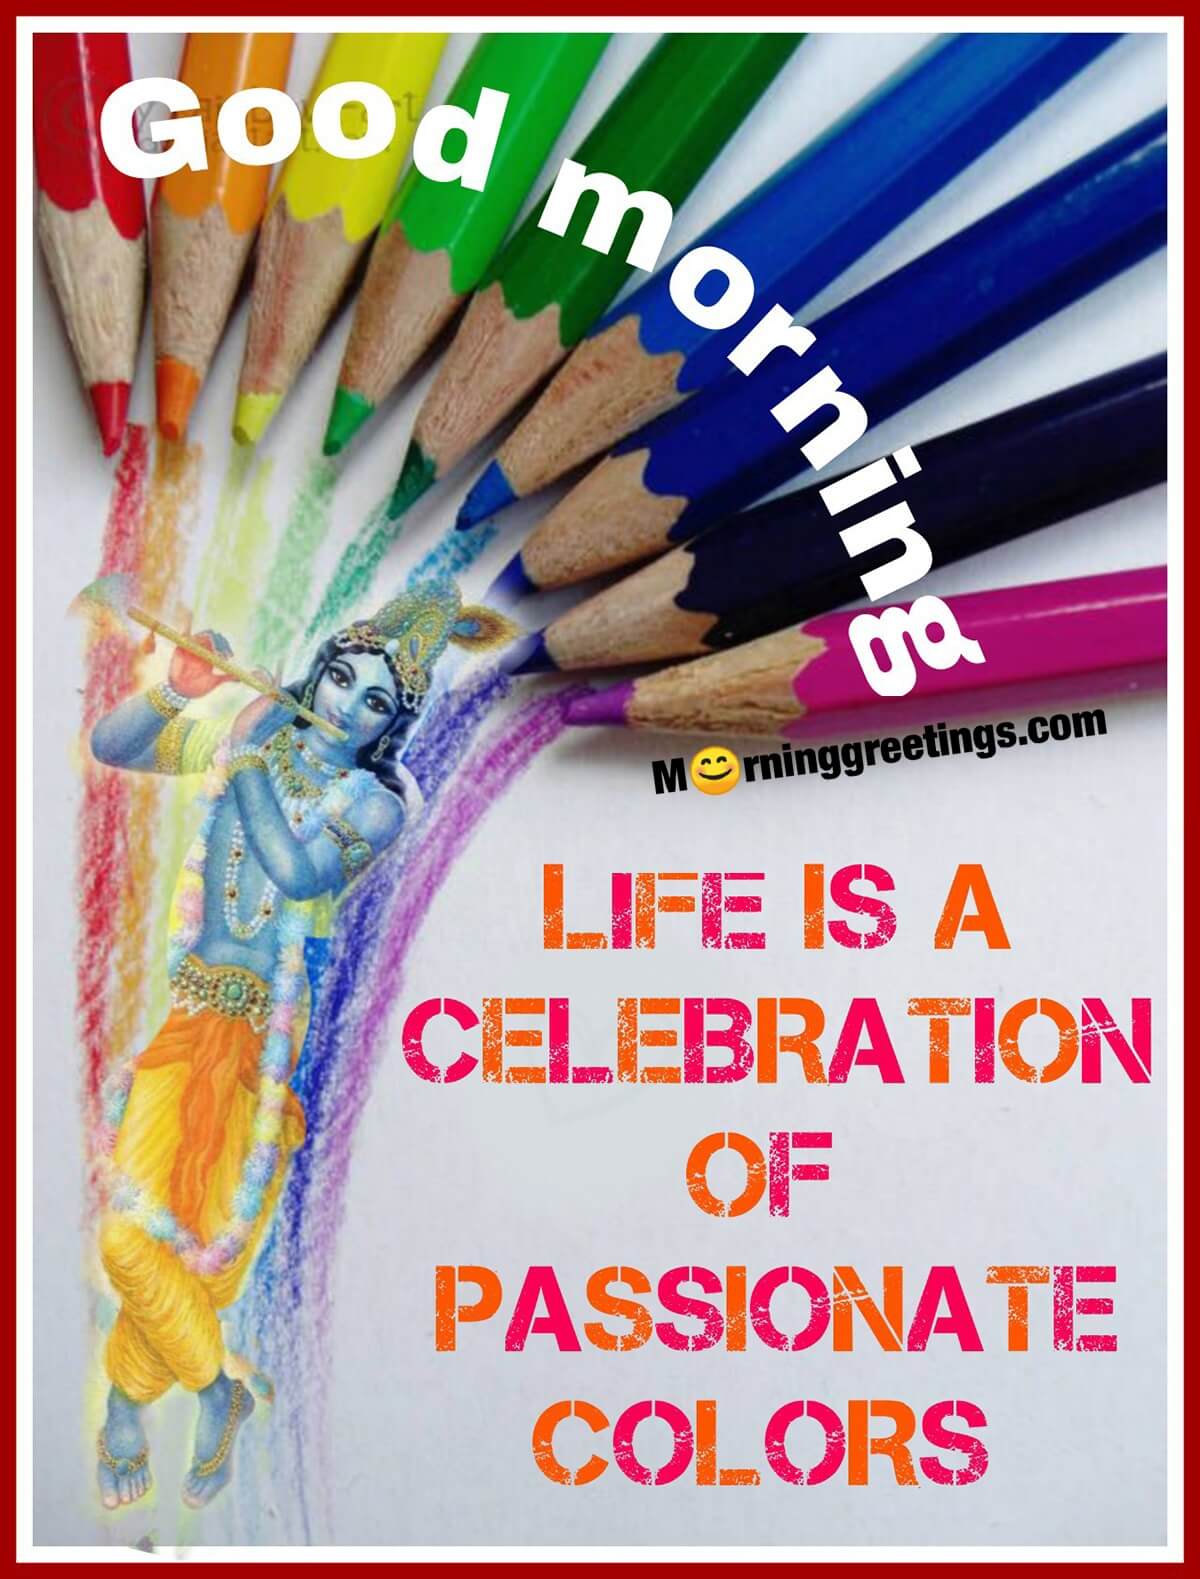 Good Morning Life Is A Celebration